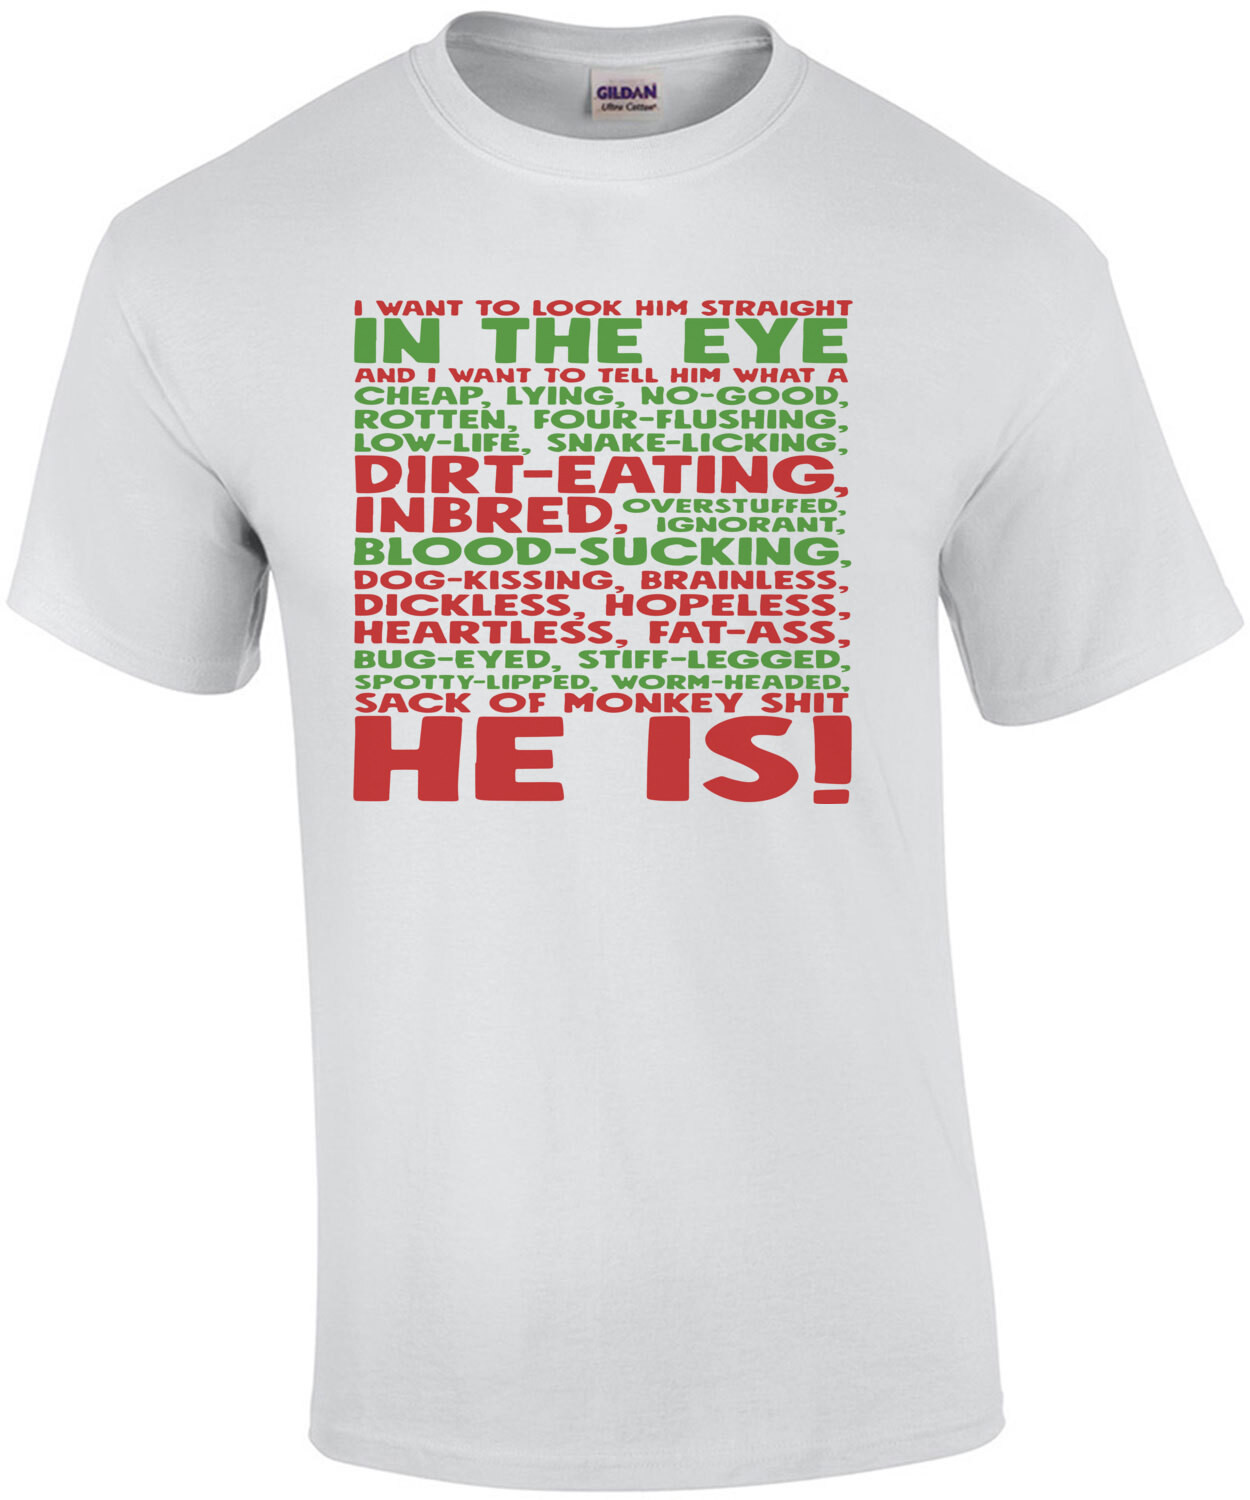 I want to look him straight in the eye and I want to tell him what a cheap, lying, no-good... Christmas T-Shirt